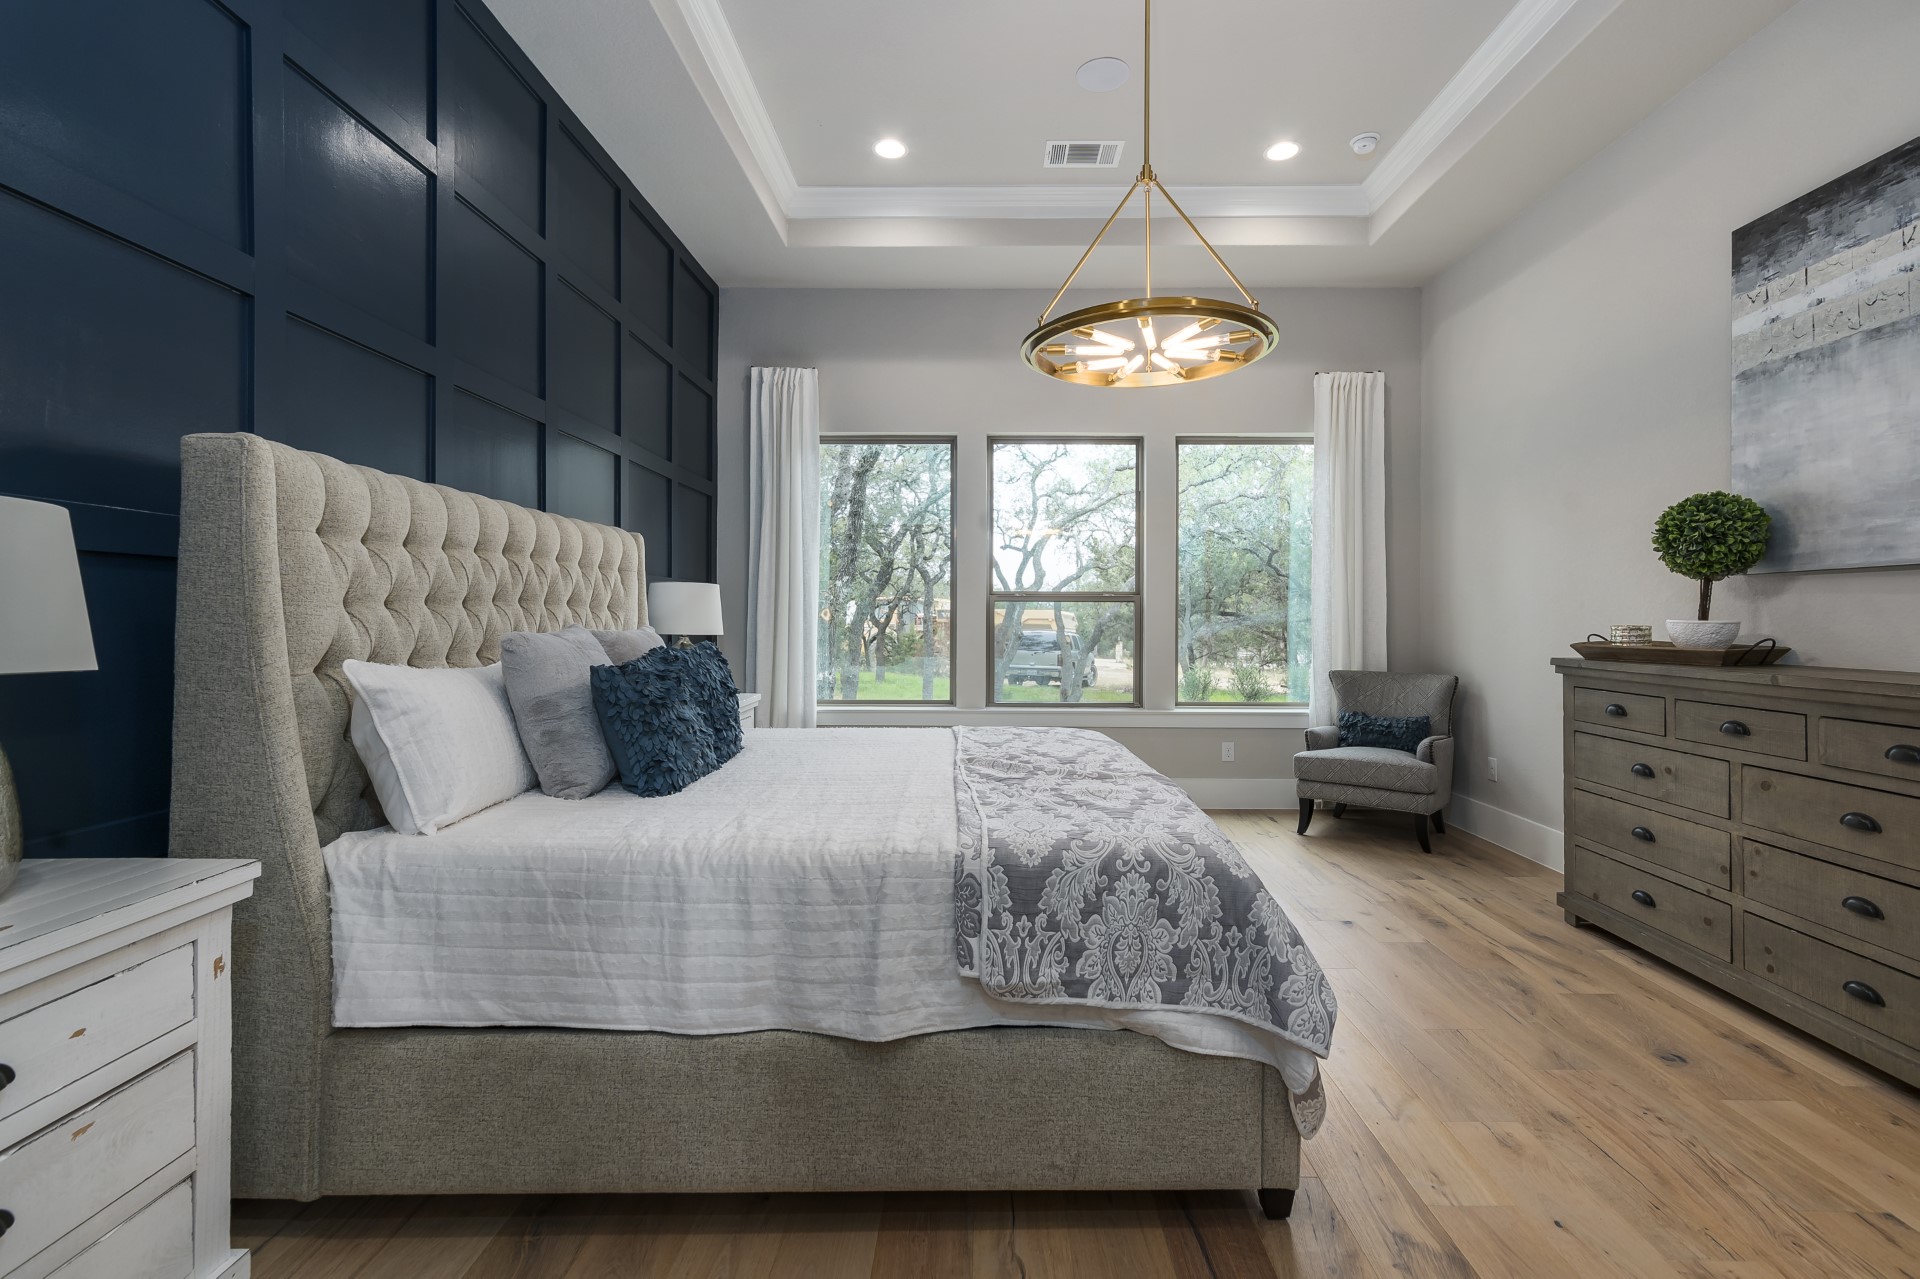 A side view of the master bedroom within the Belle Oaks custom floor plan from JLP Builders